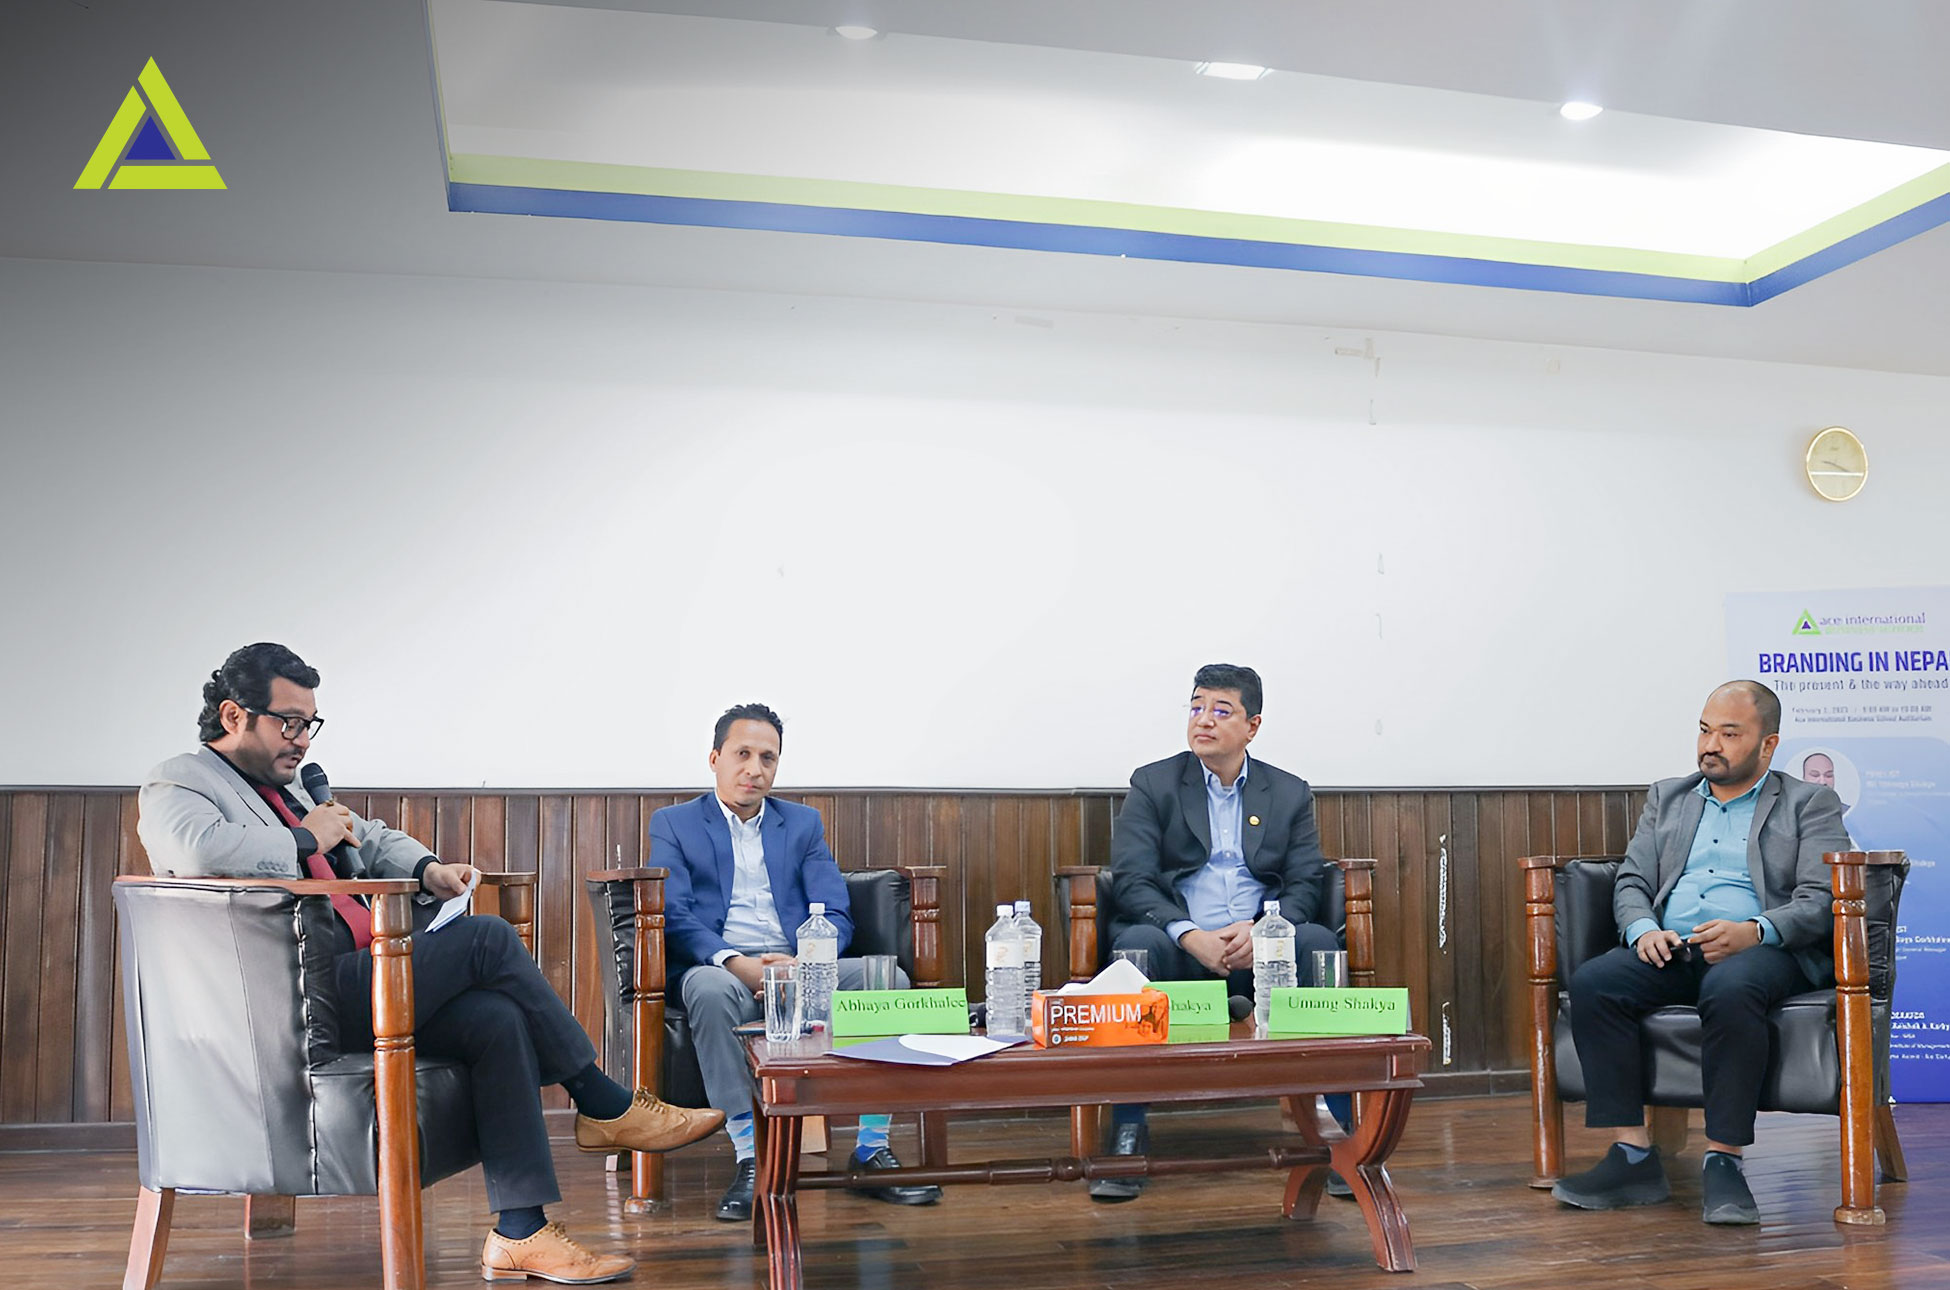 Panel Discussion: Branding in Nepal